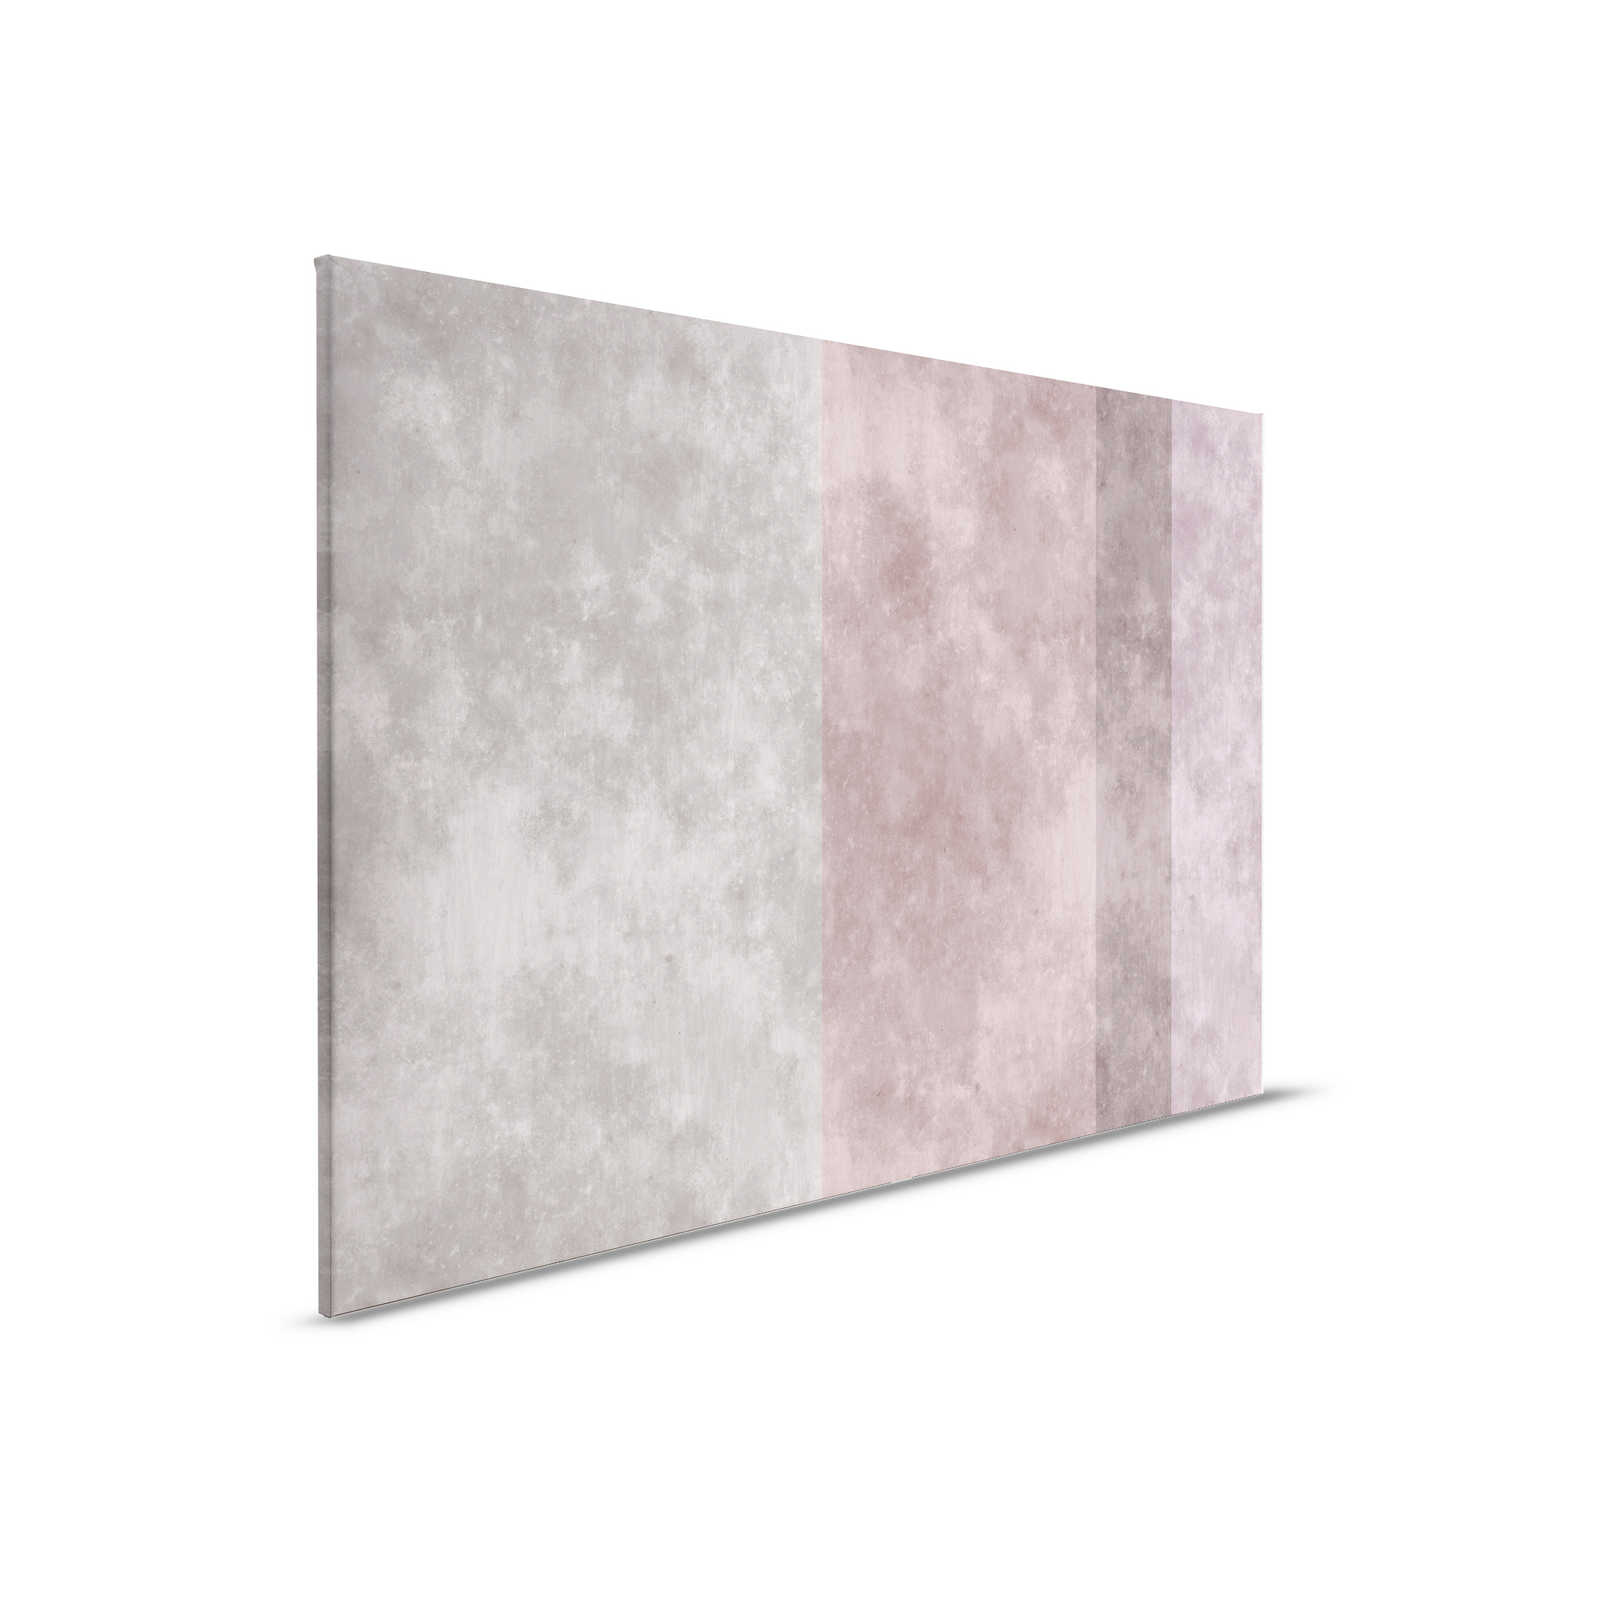 Concrete-look canvas picture with stripes | grey, pink - 0.90 m x 0.60 m
